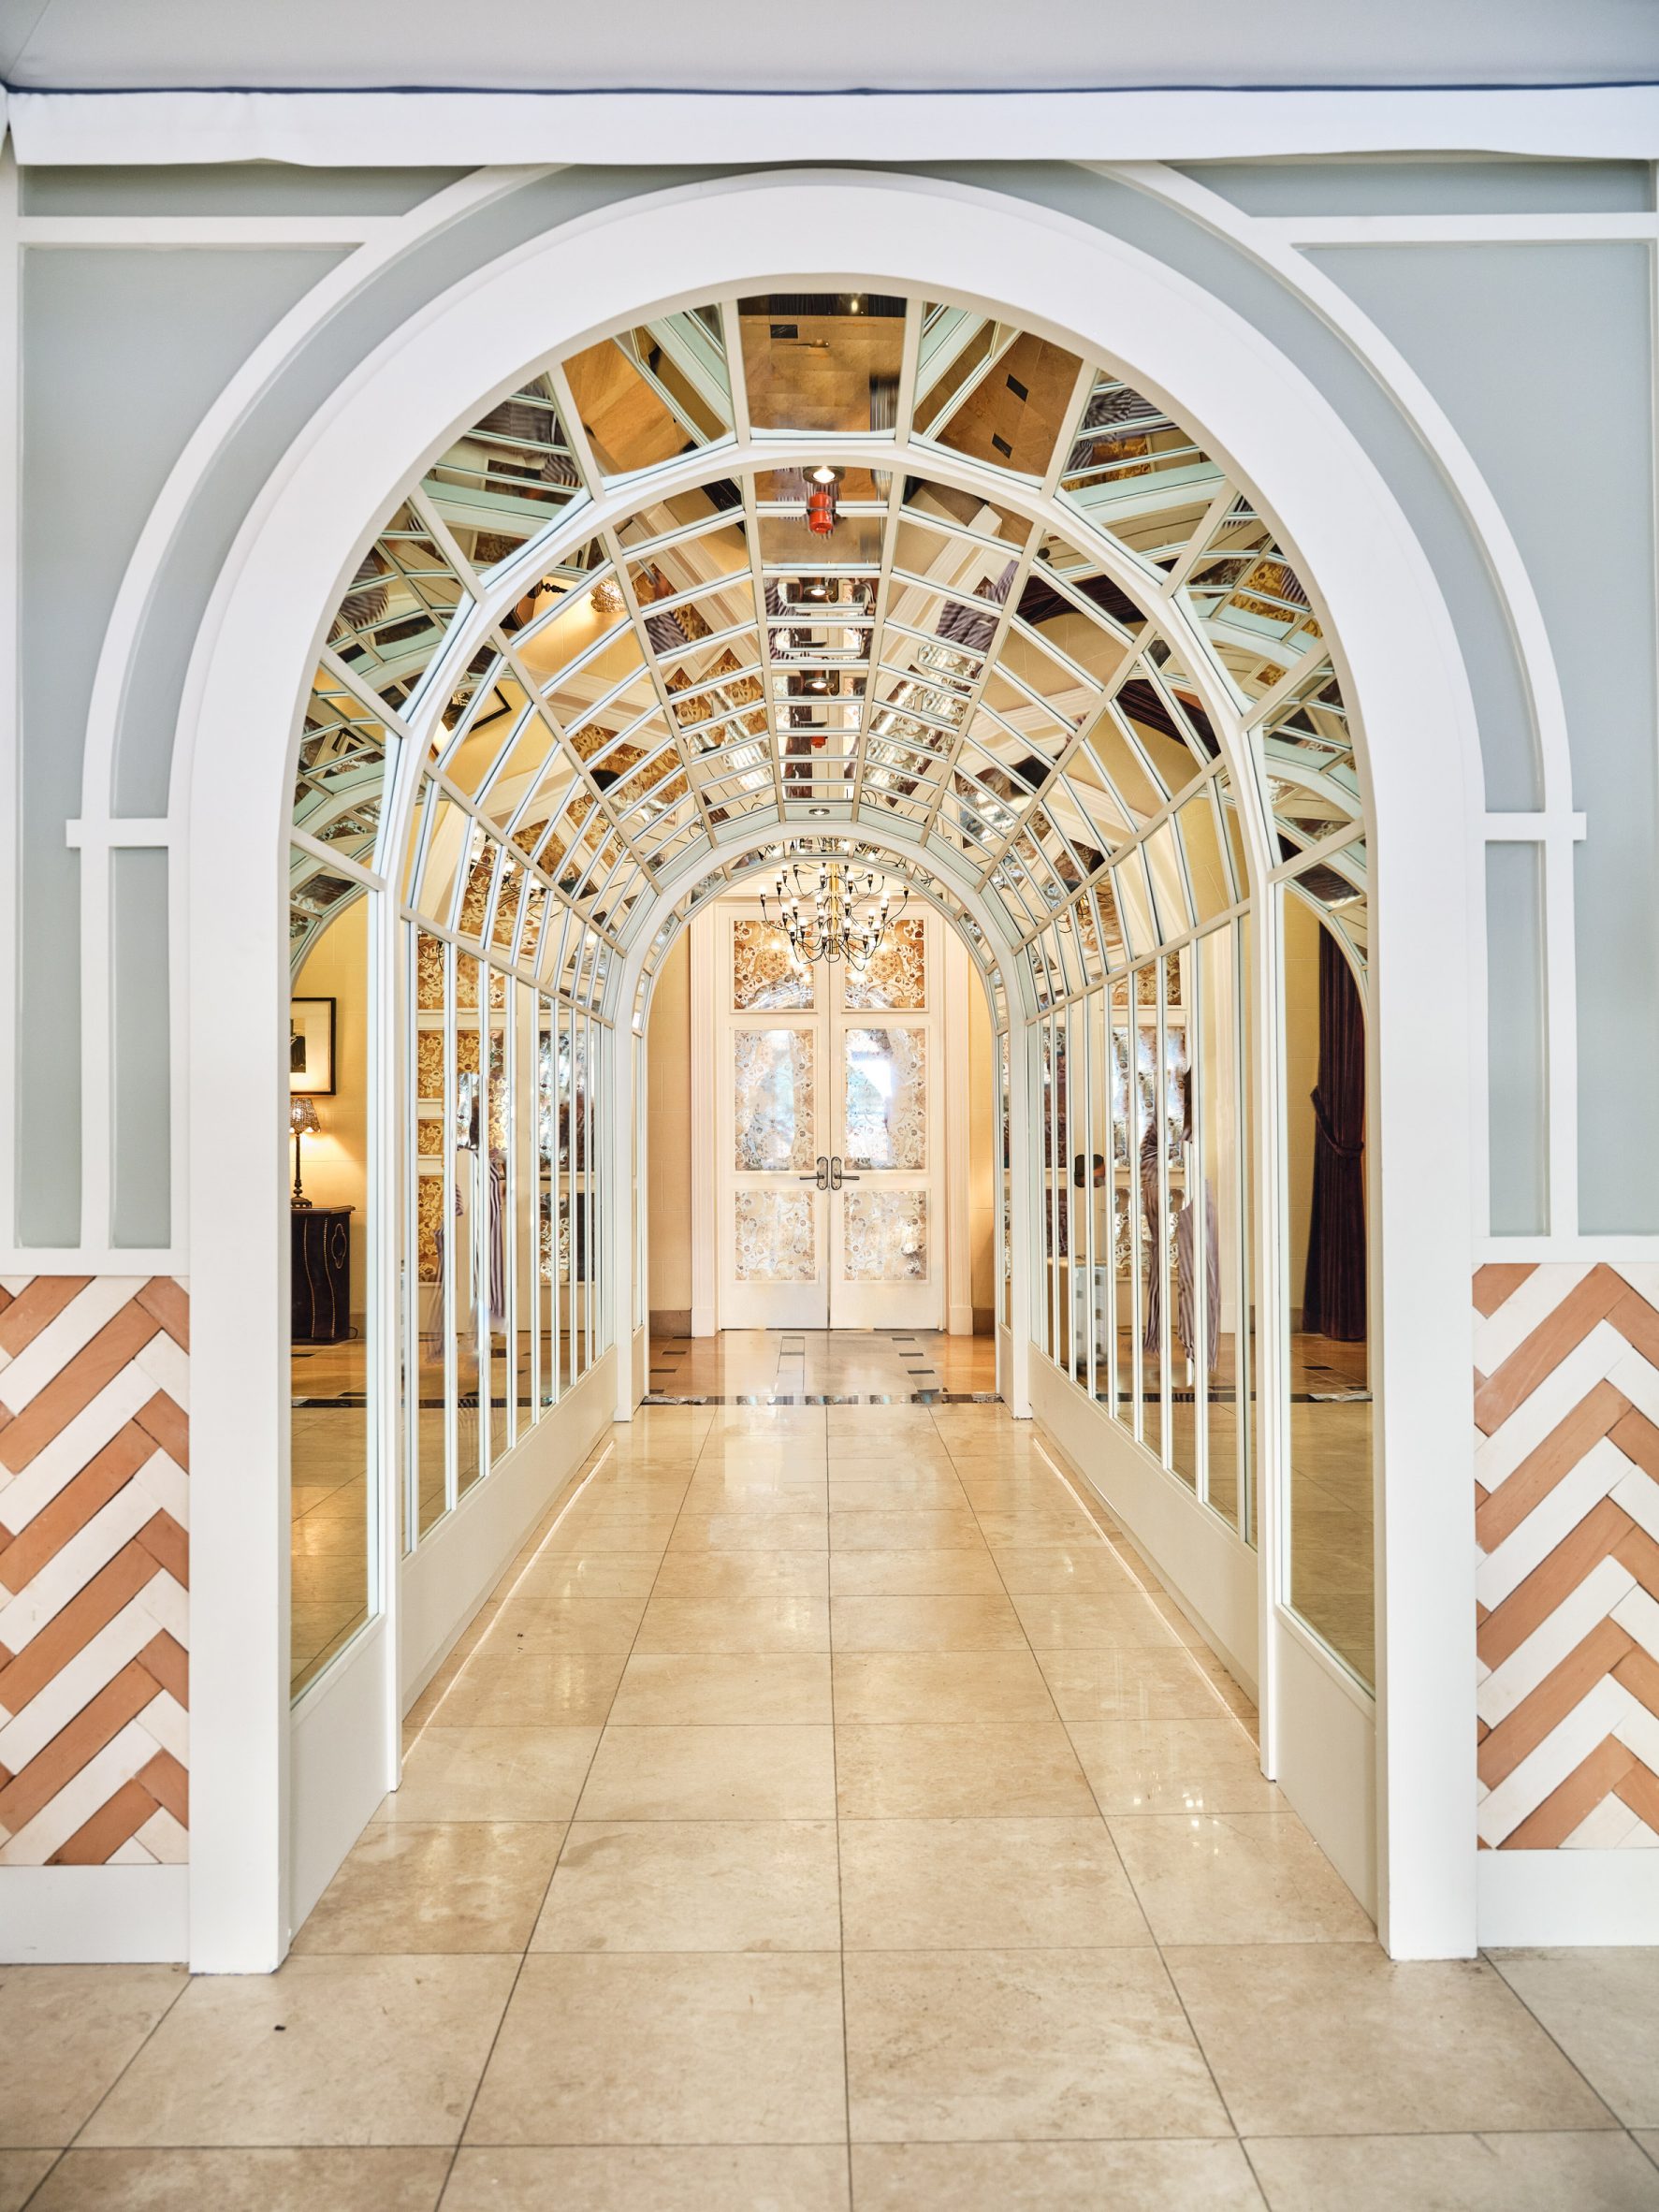 A mirror-lined arched gallery